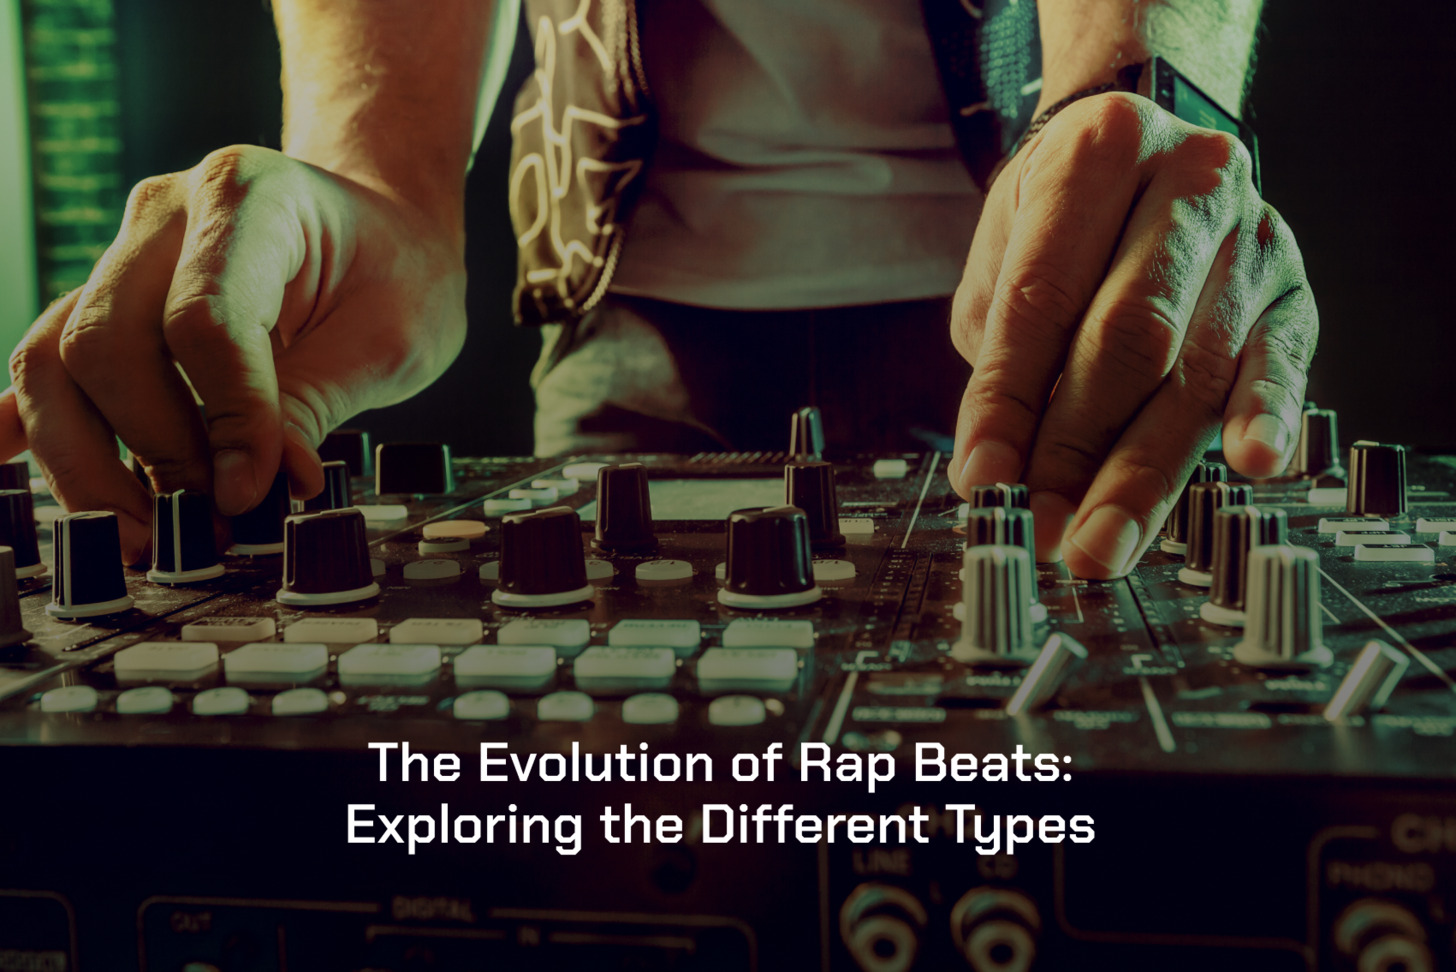 The Evolution of Rap Beats: Exploring the Different Types